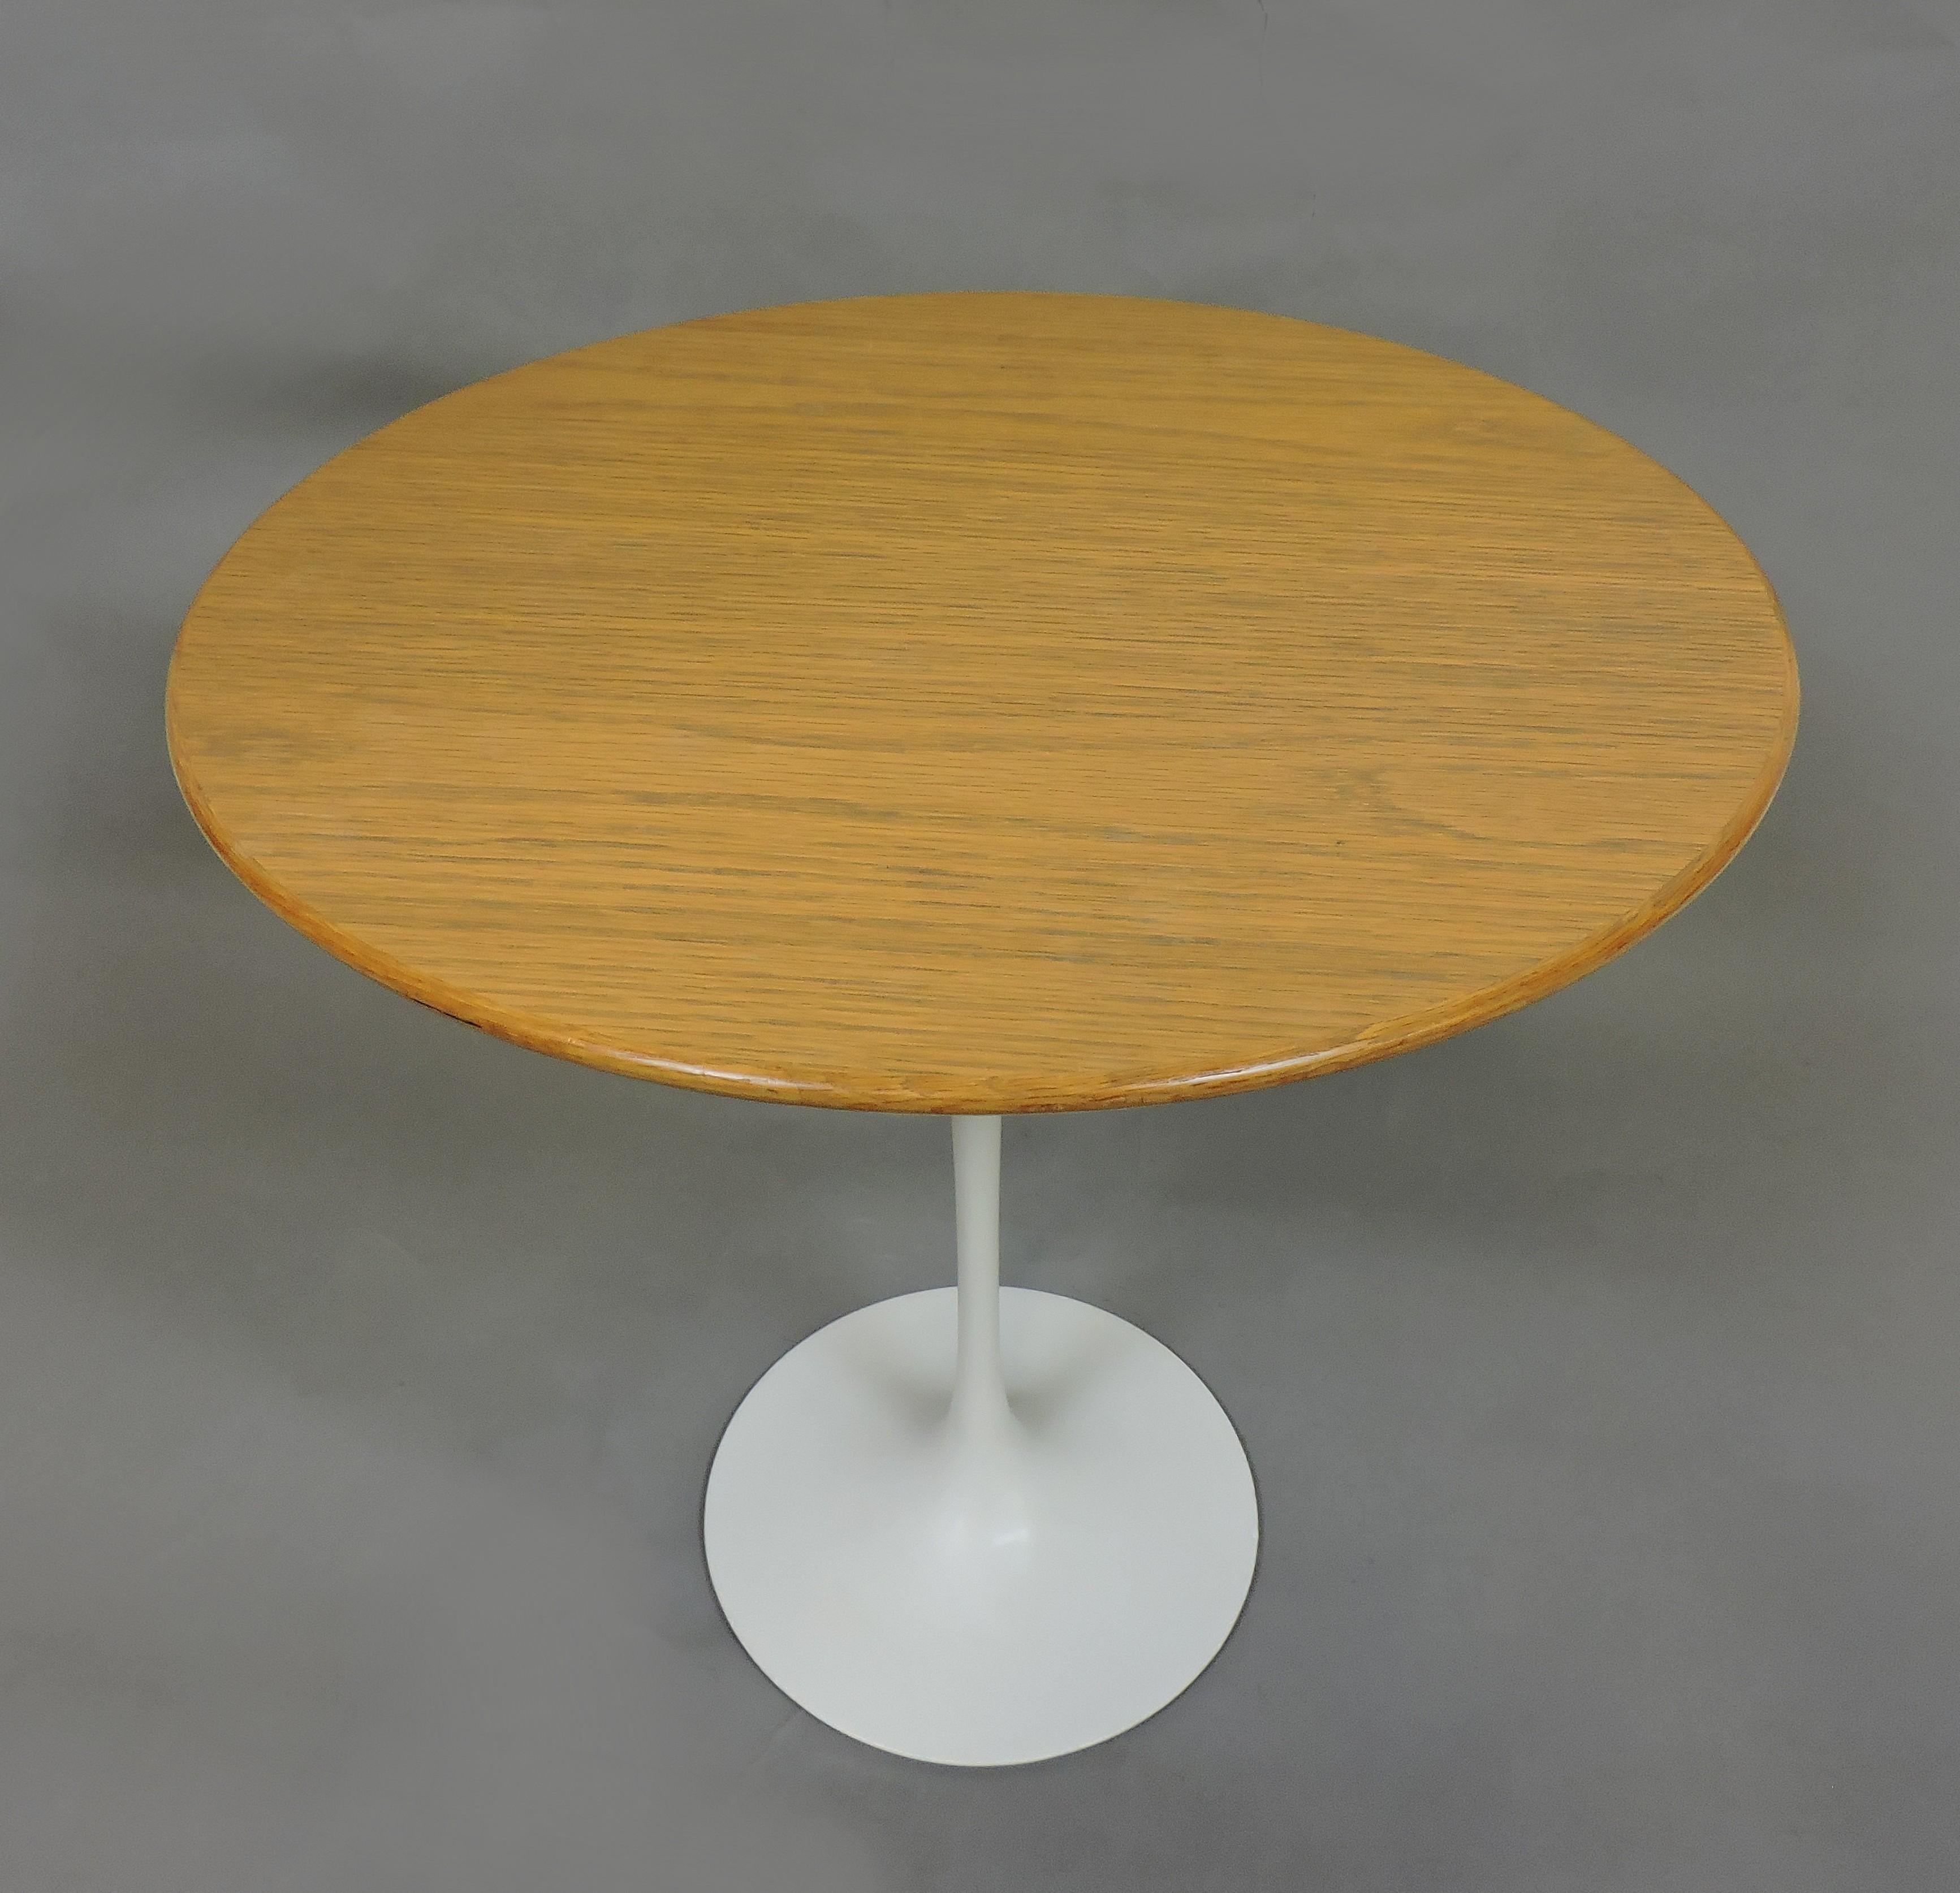 Classic tulip side table designed by Eero Saarinen and manufactured by Knoll. This table has a 20 inch diameter oak top, a white pedestal base, and was made in 1978. Knoll label underneath.